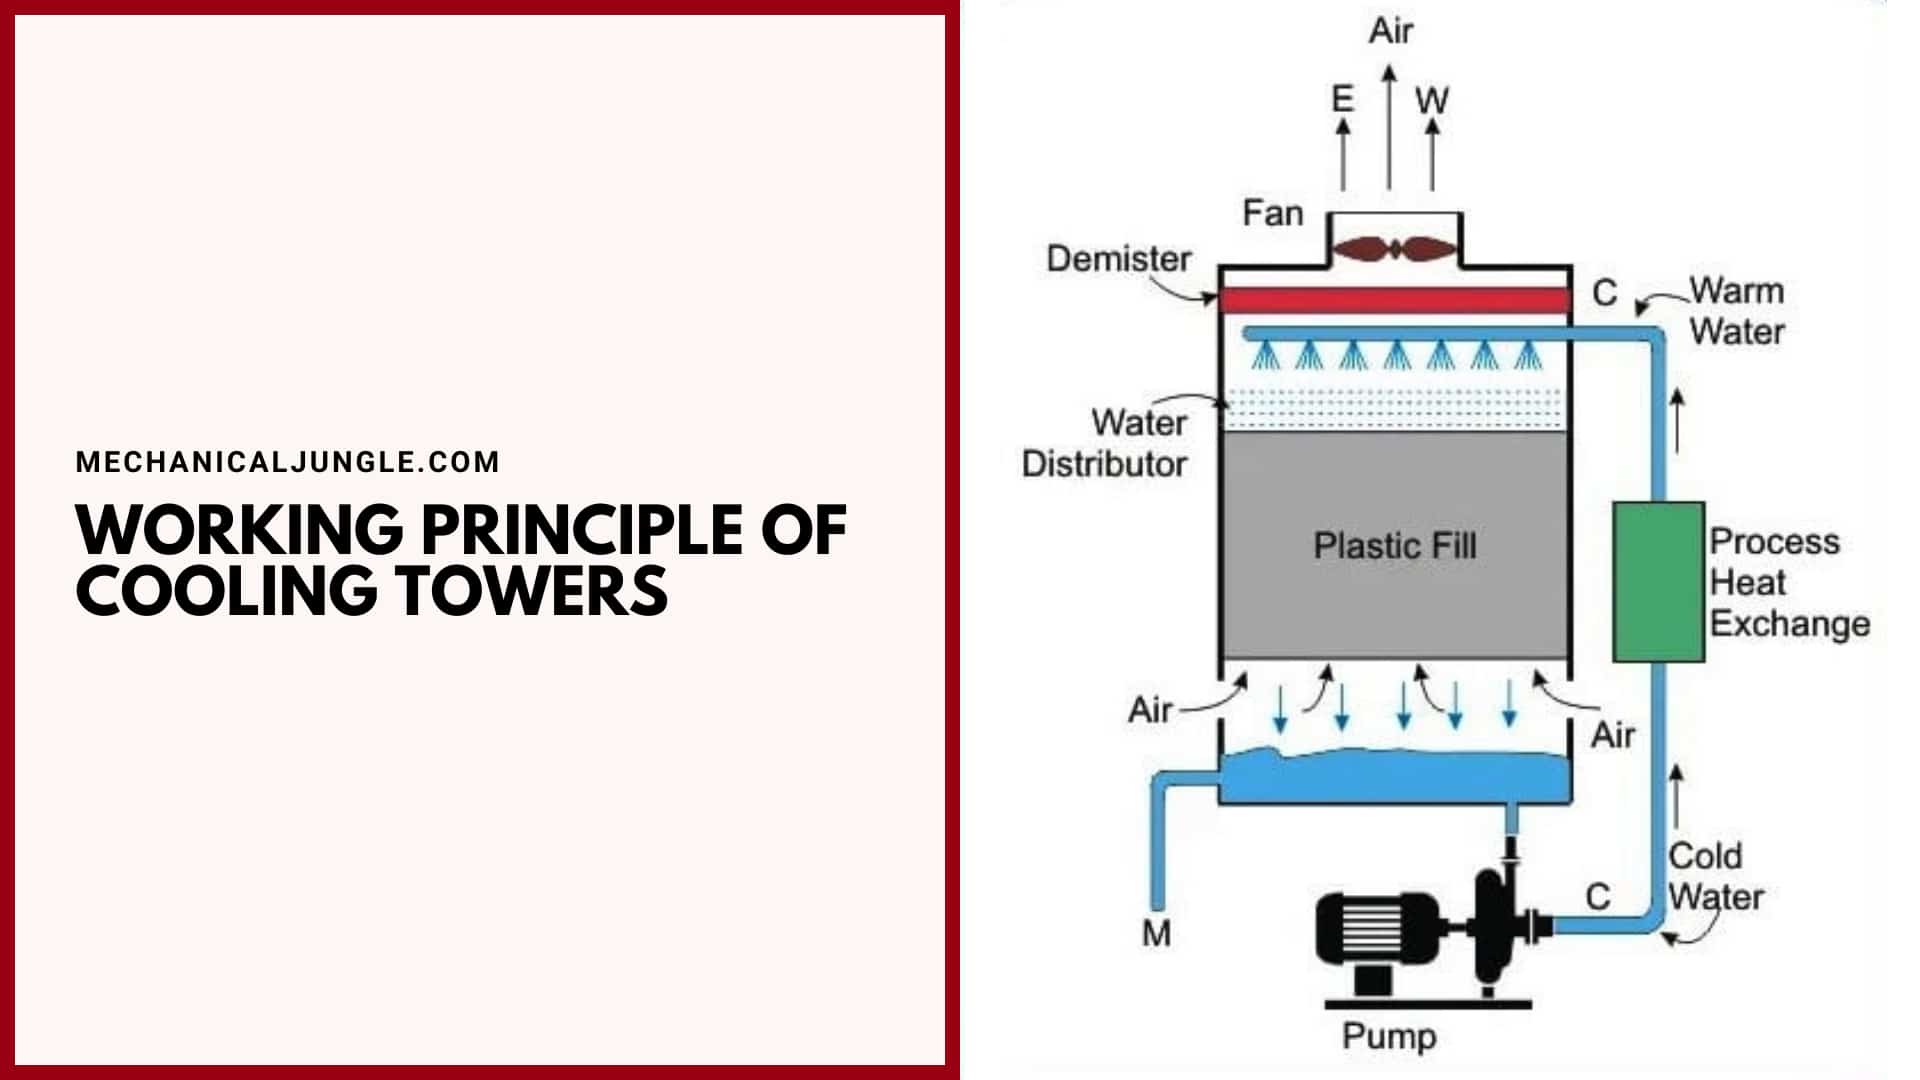 Working Principle of Cooling Towers